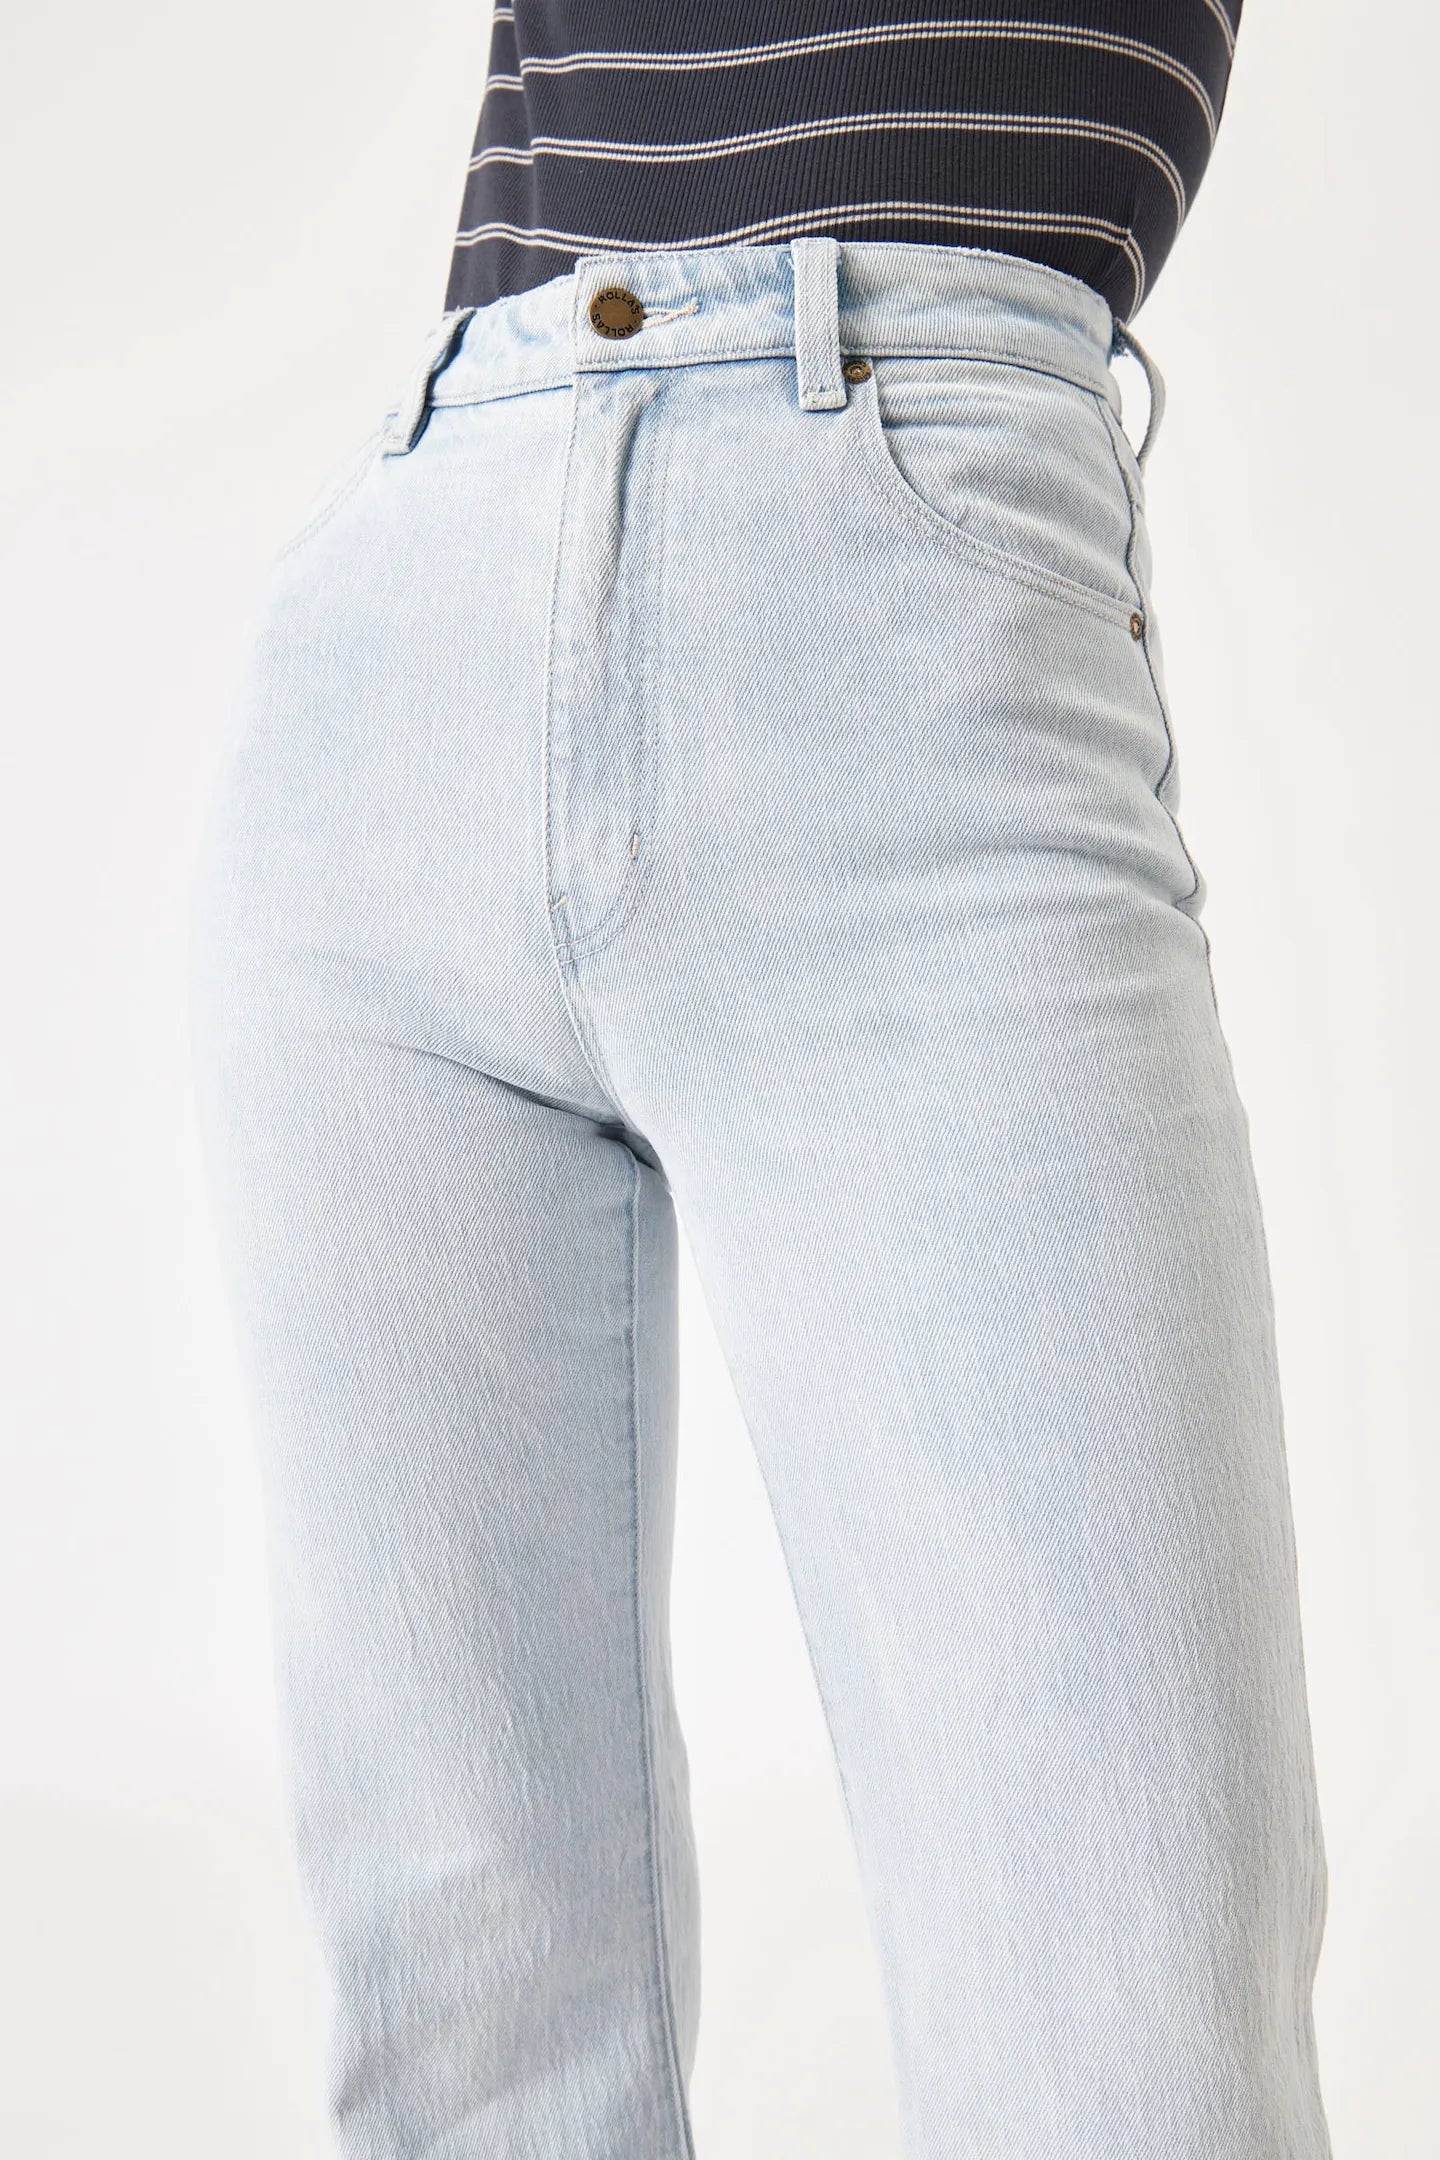 The Eastcoast Flare Organic Denim by Rolla&#39;s